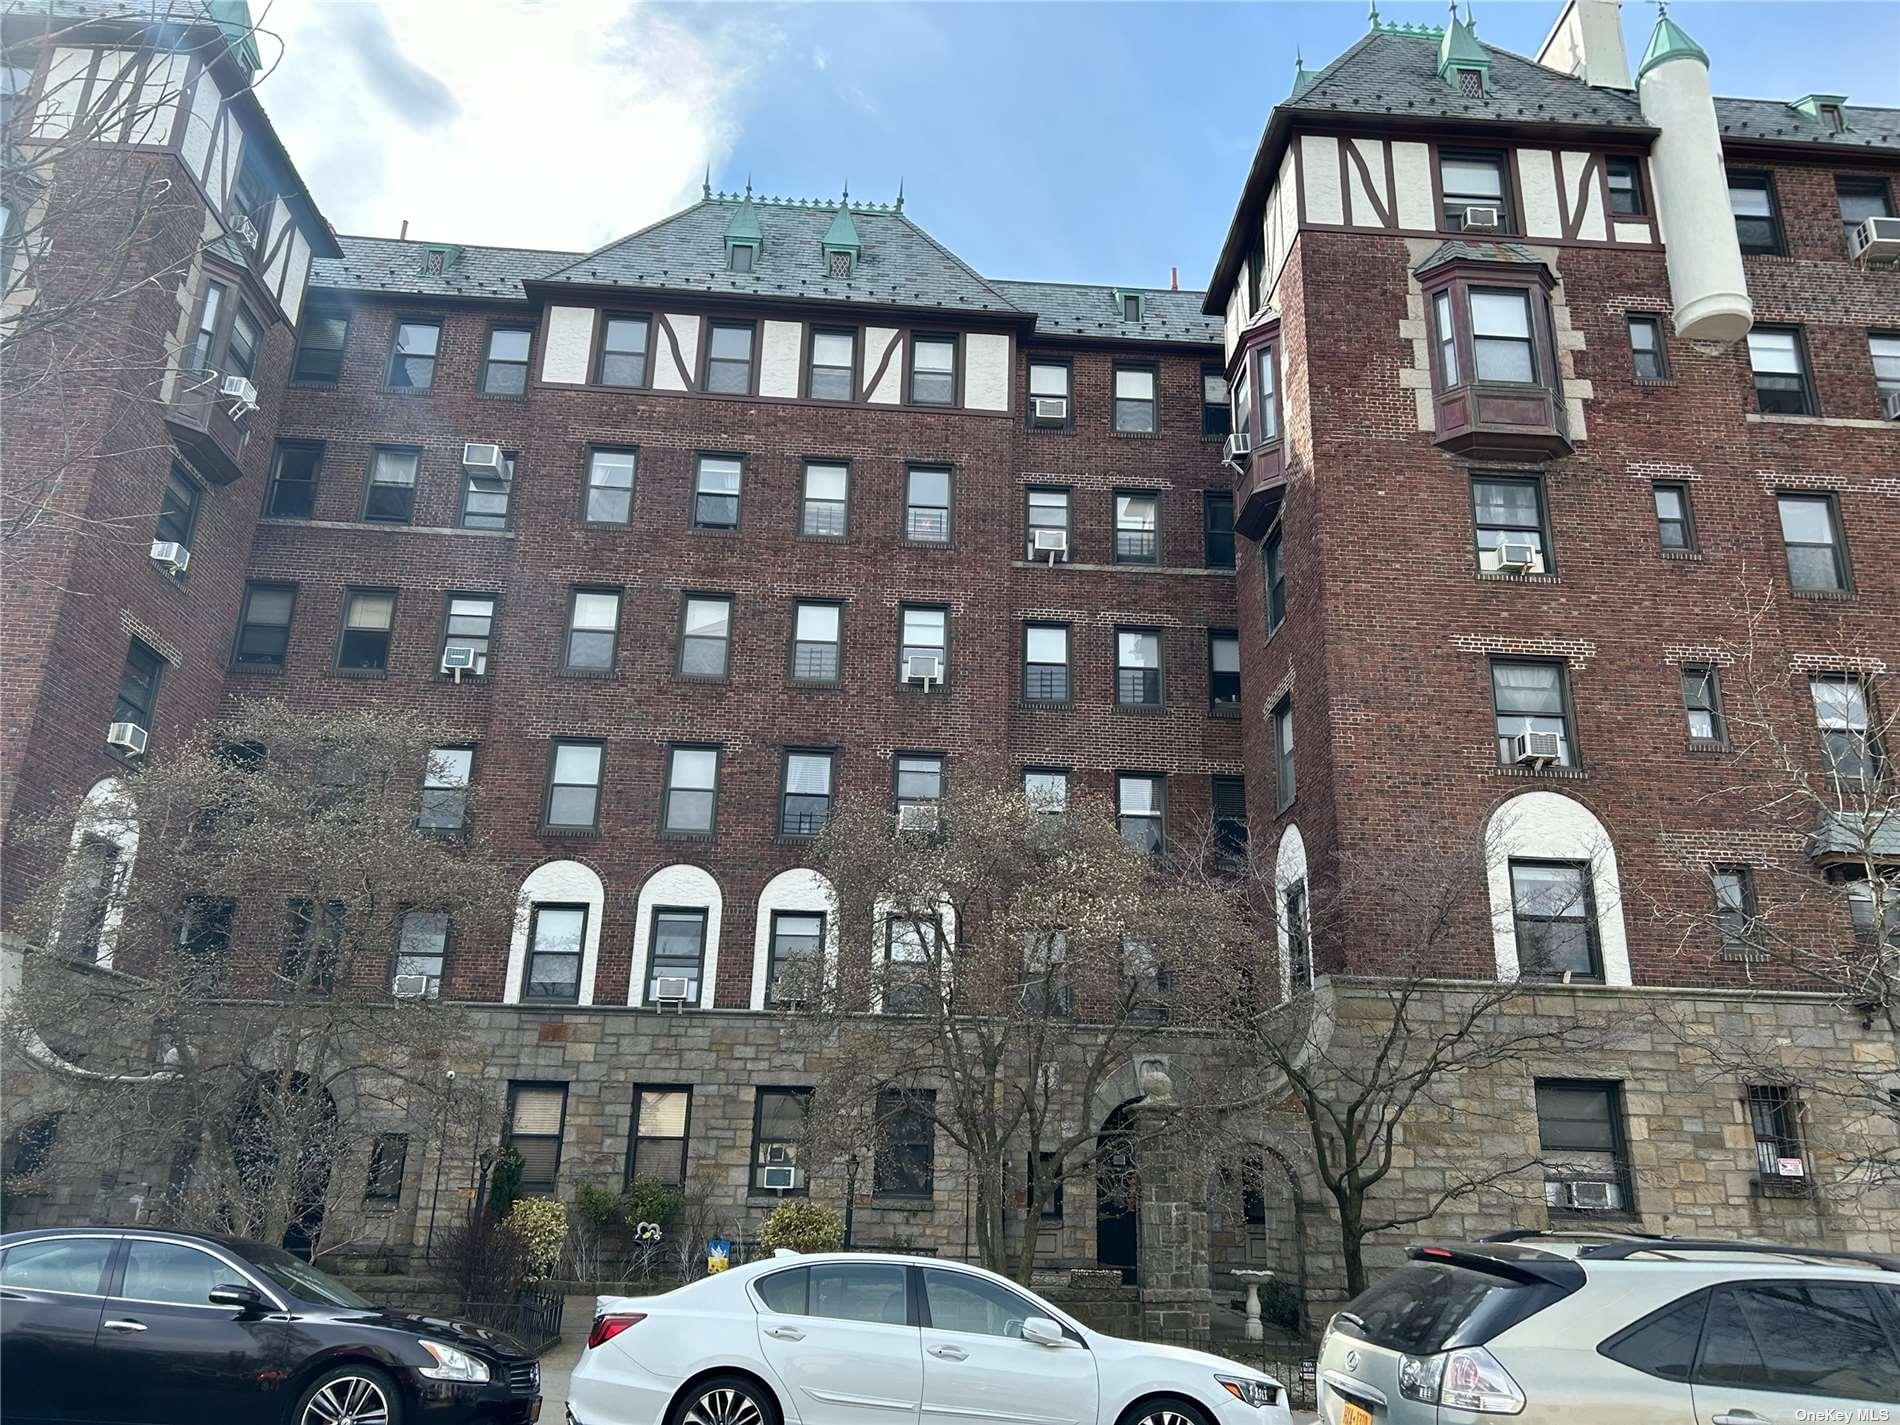 77-20 Austin Street #4F in Queens, Forest Hills, NY 11375